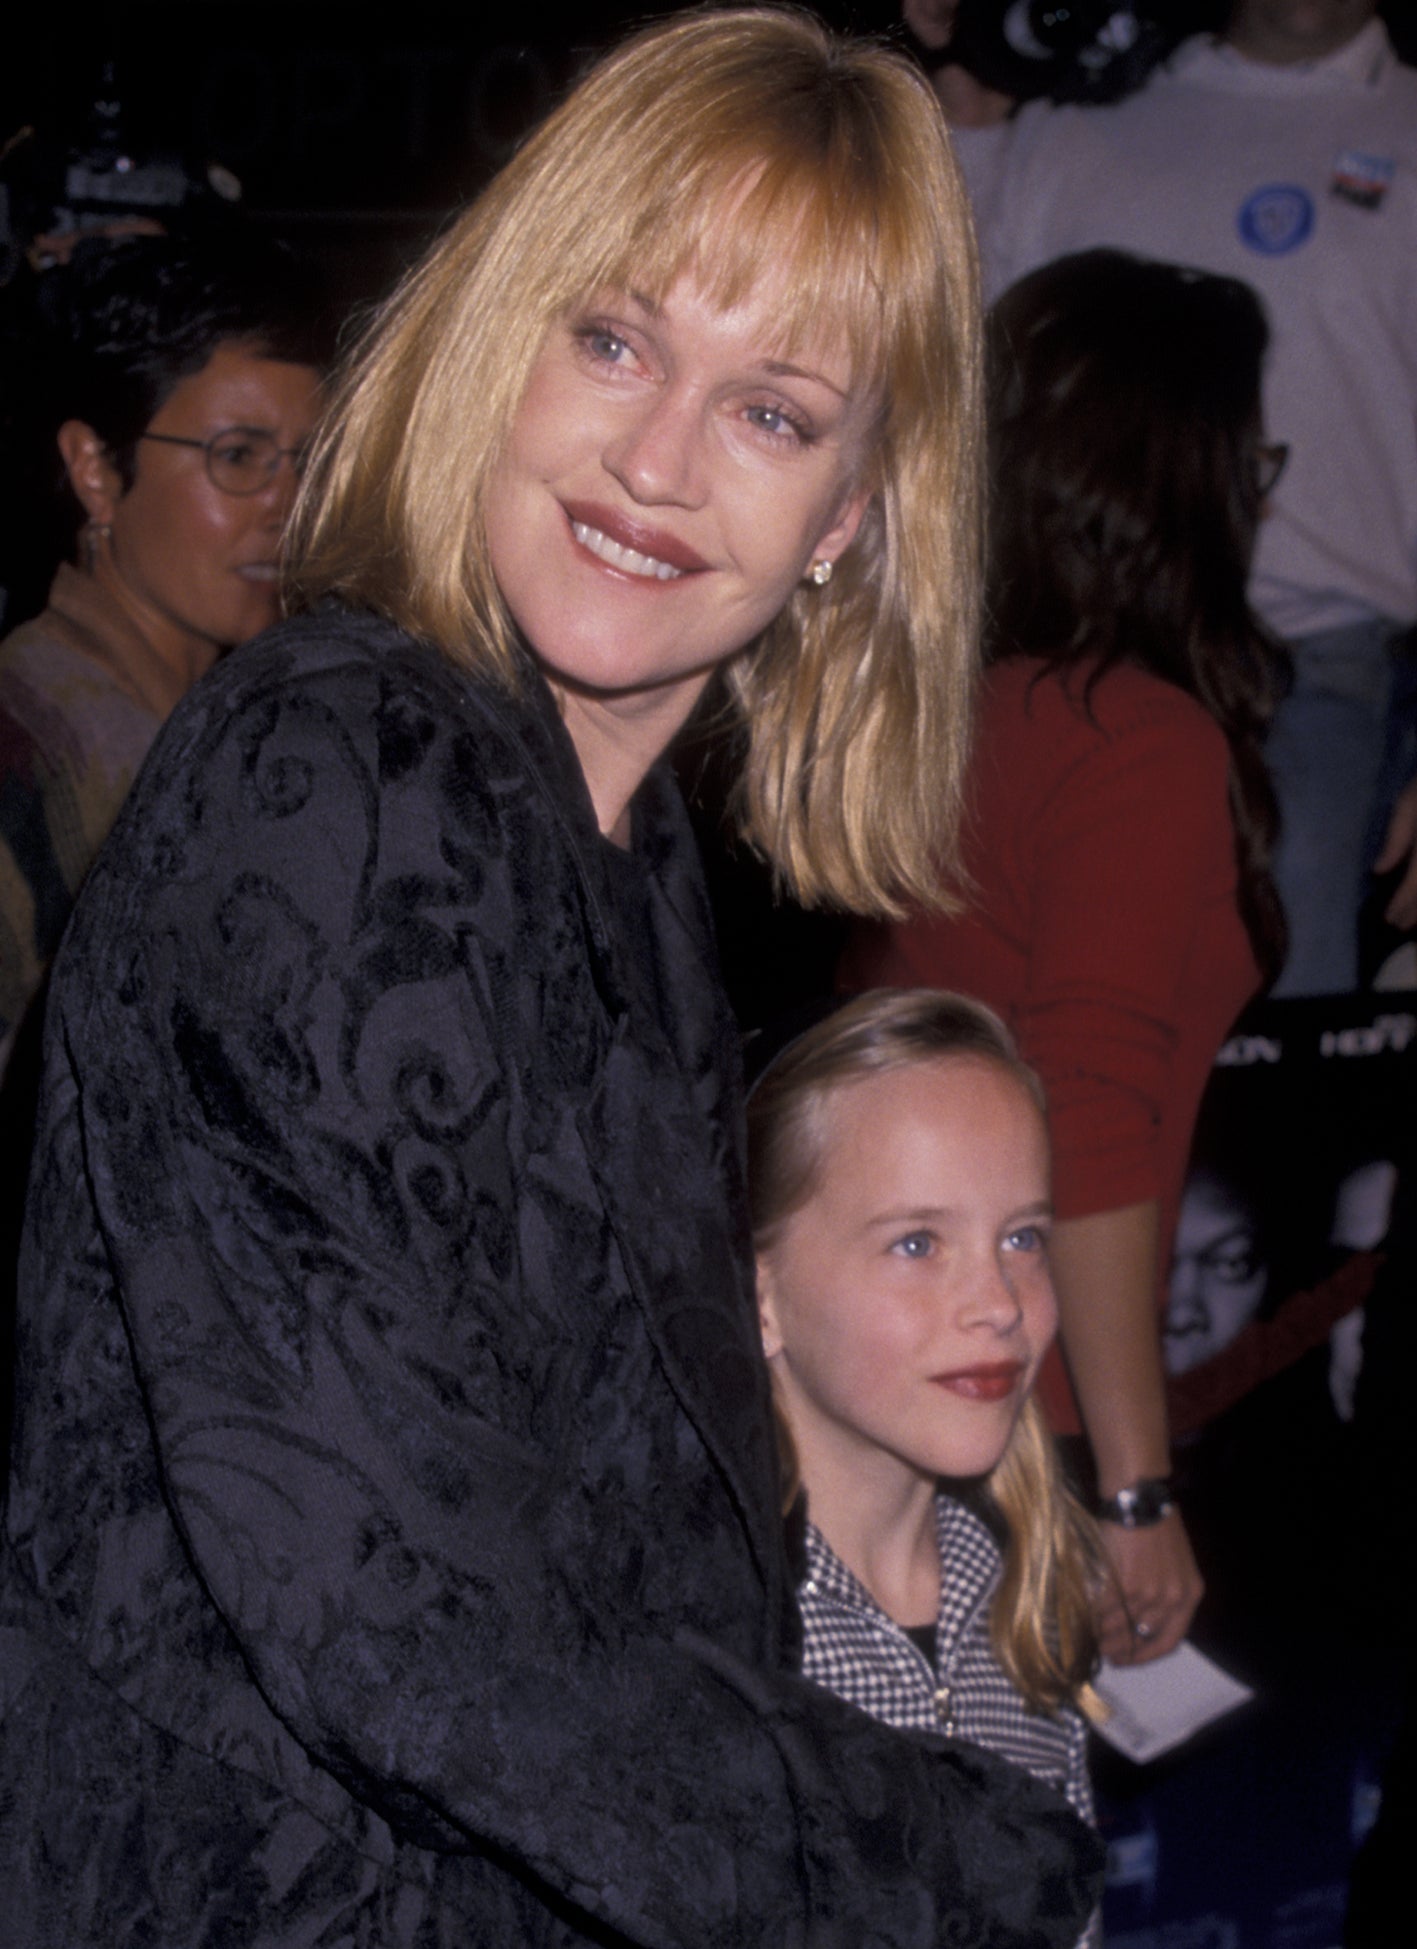 Close-up of Dakota as a child with Melanie Griffith at a media event